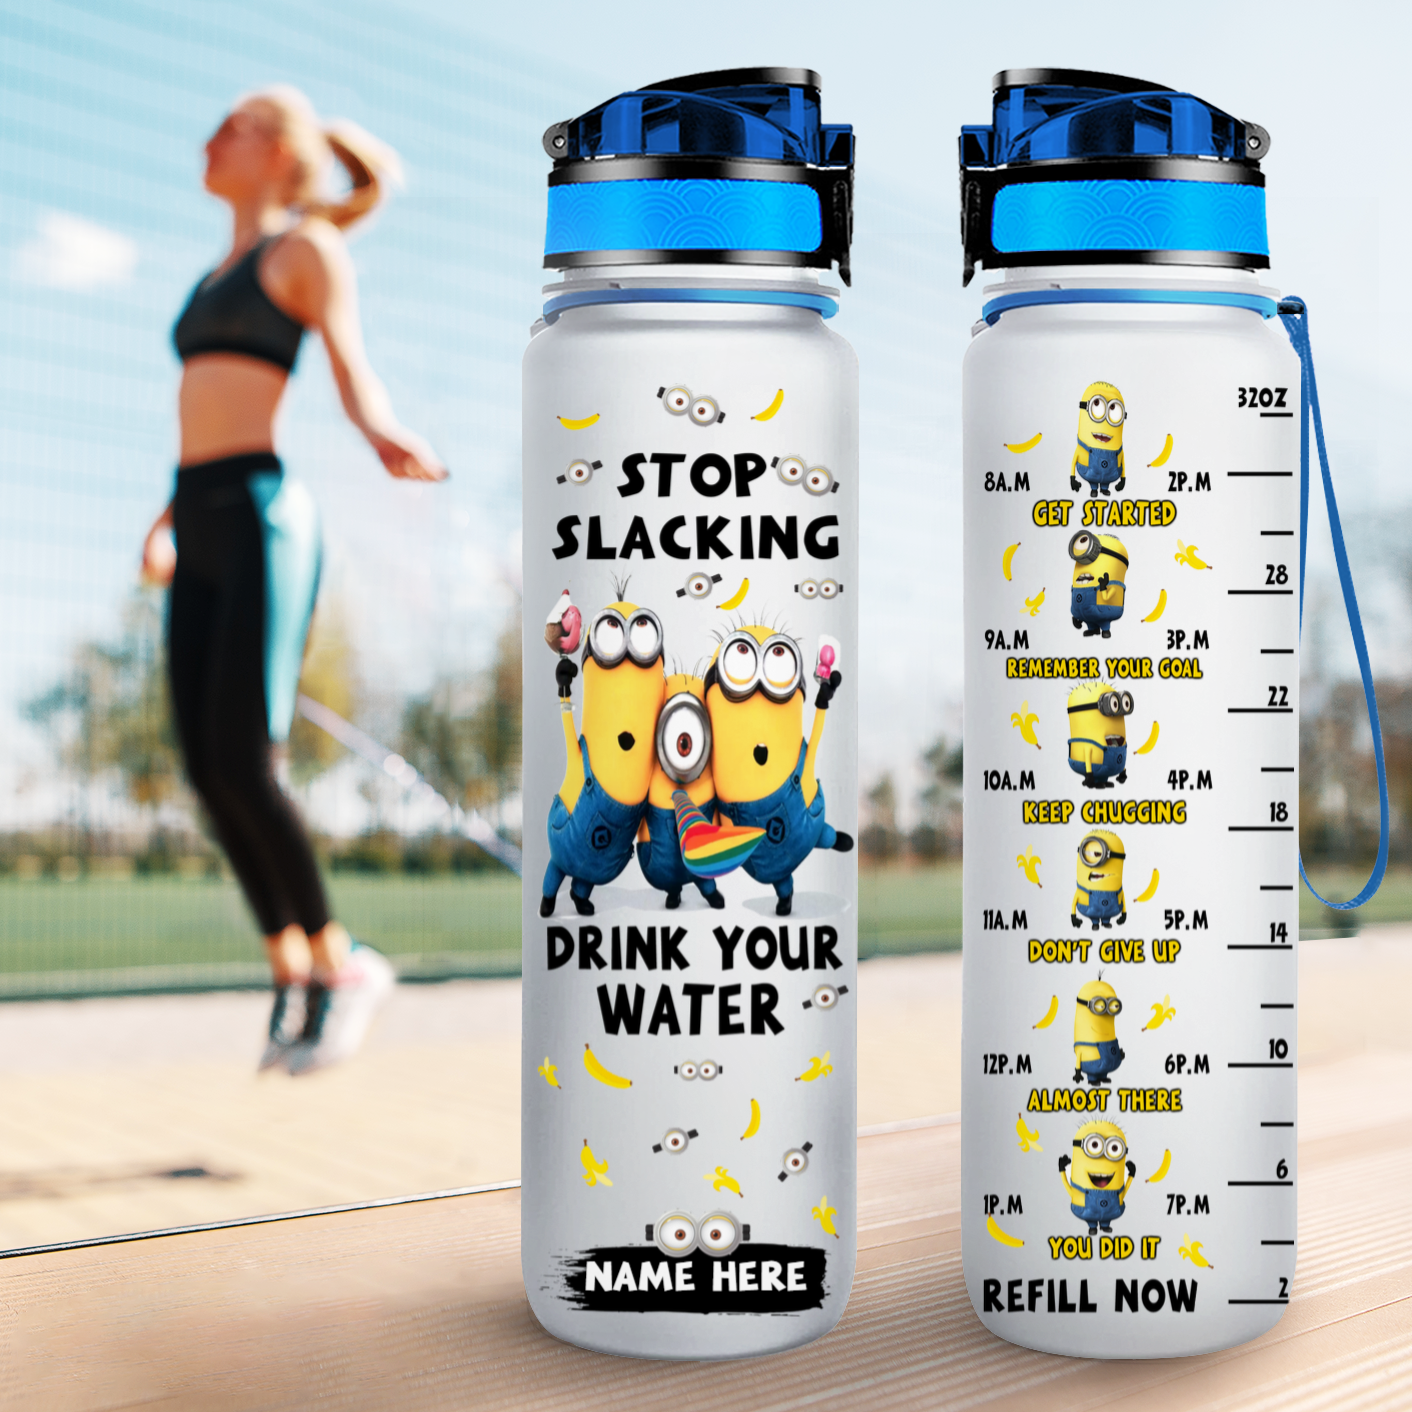 8 Minions Stop Slacking Drink your water tracker bottle 4